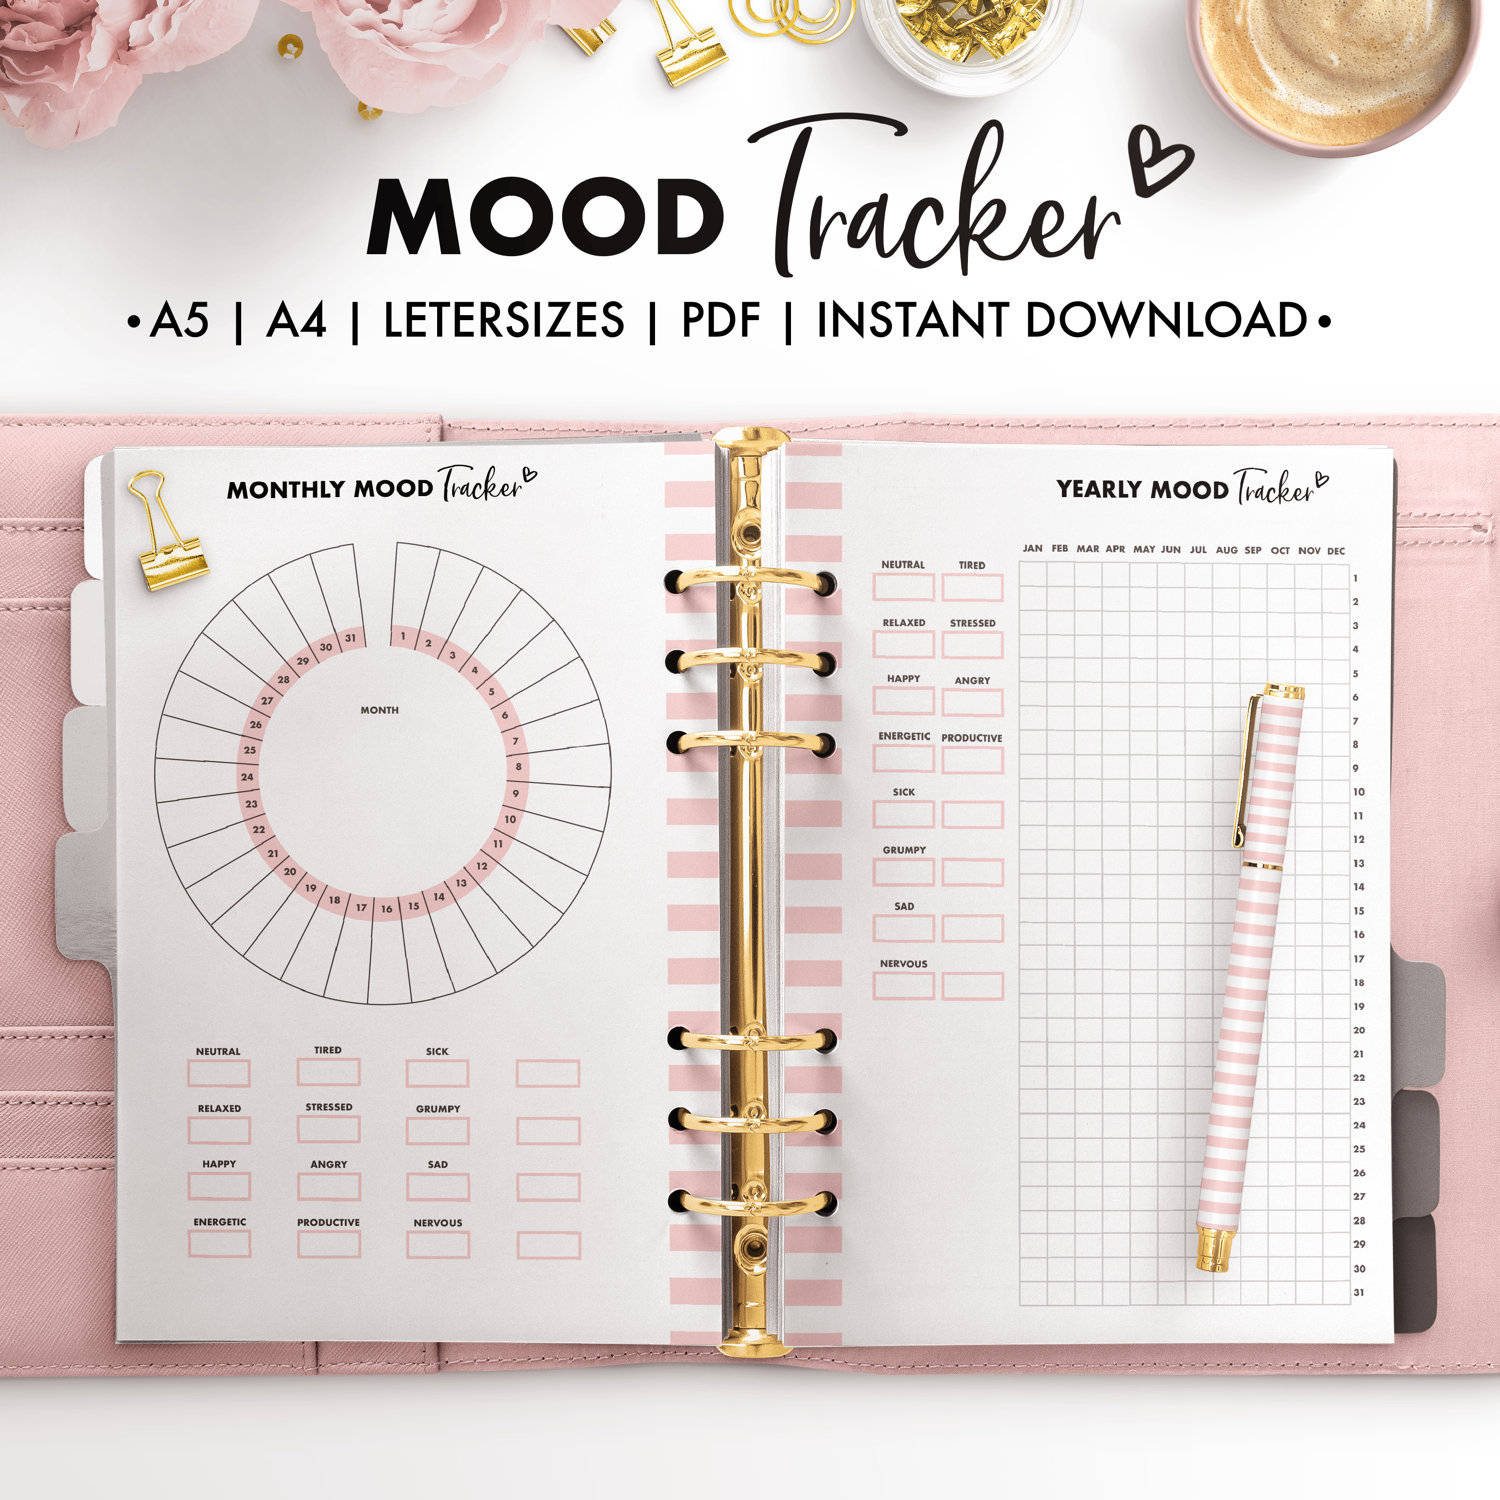 A5 Mood Tracker, Mood Tracker Printable, Monthly Mood Tracker, Yearly Mood  Tracker, Mood Planner, Feelings Tracker, A5 Mood Tracker Planner